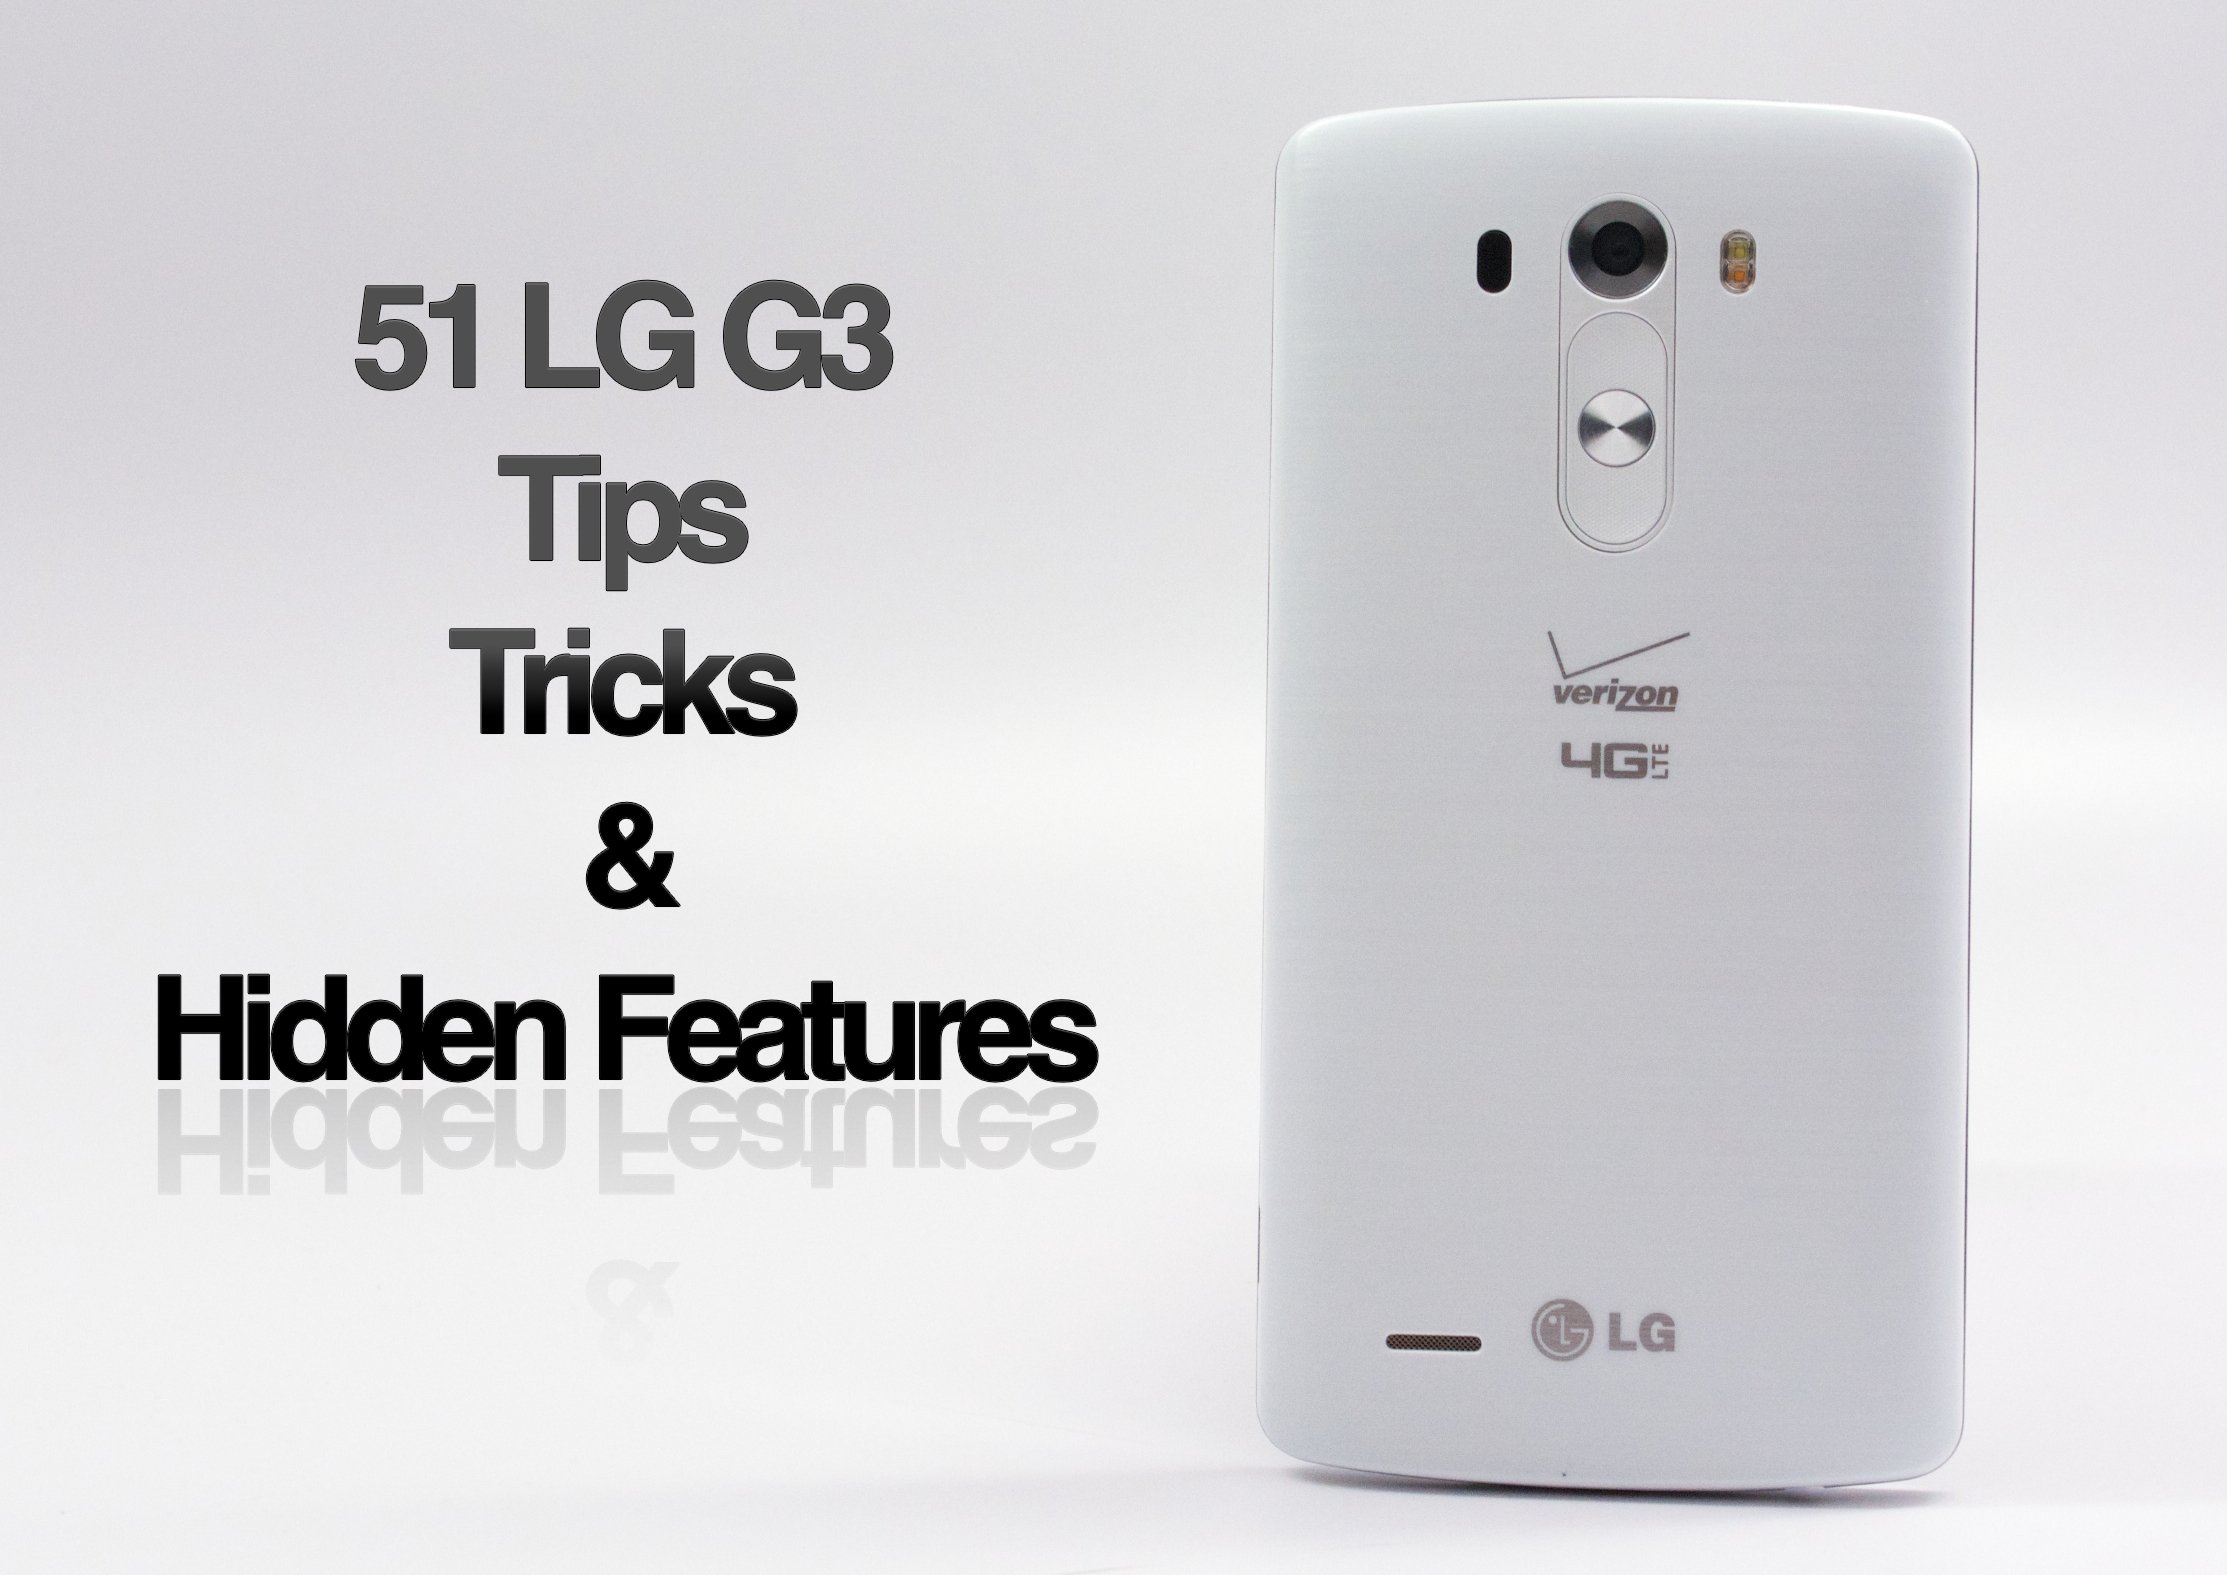 Use these LG G3 tips, tricks and hidden features to replace your LG G3 manual.